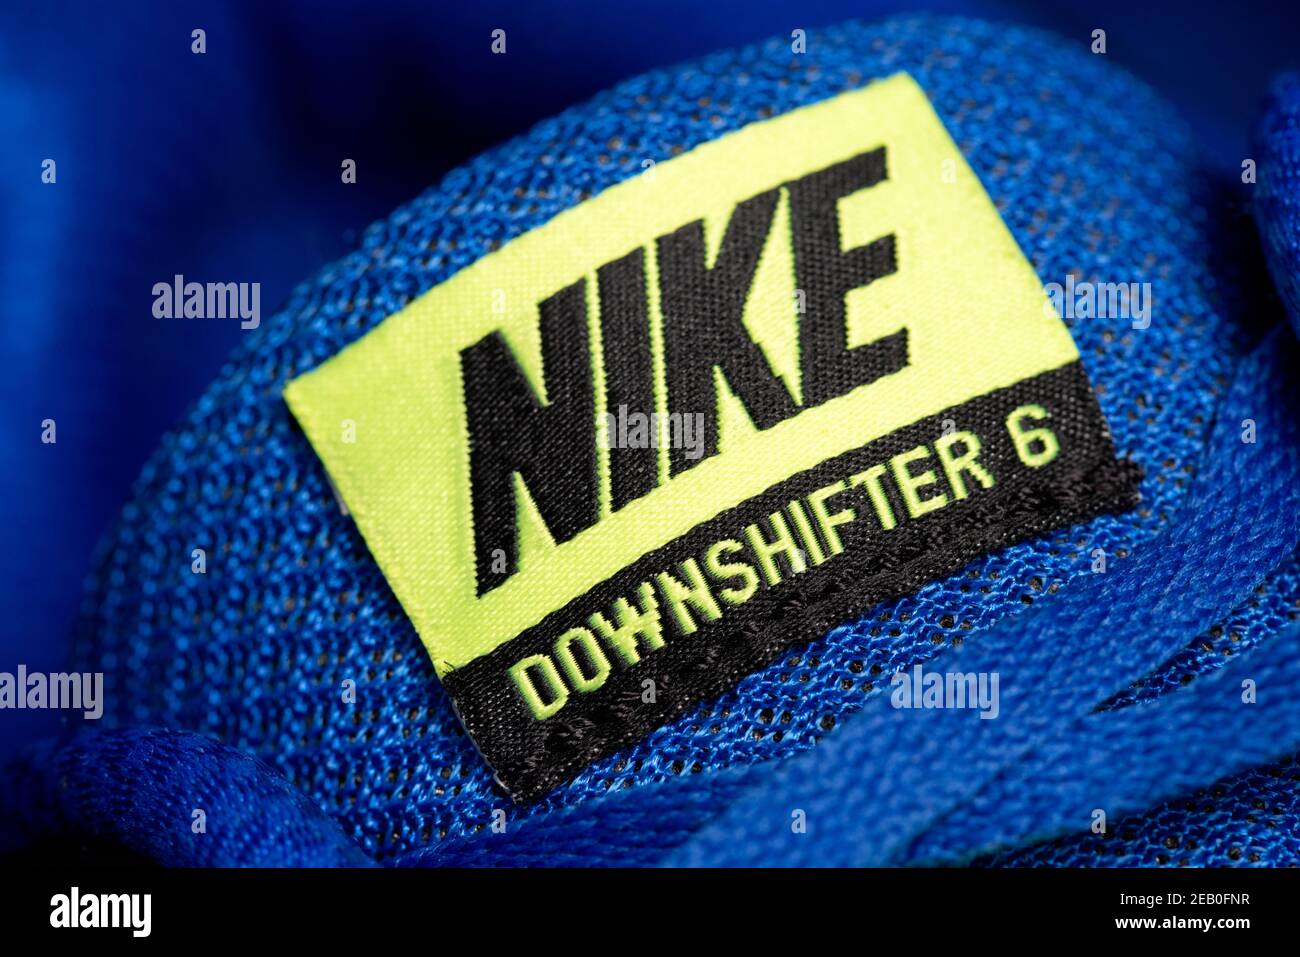 Nike Downshifter 6 yellow logo and label on blue trainers tongue Stock  Photo - Alamy